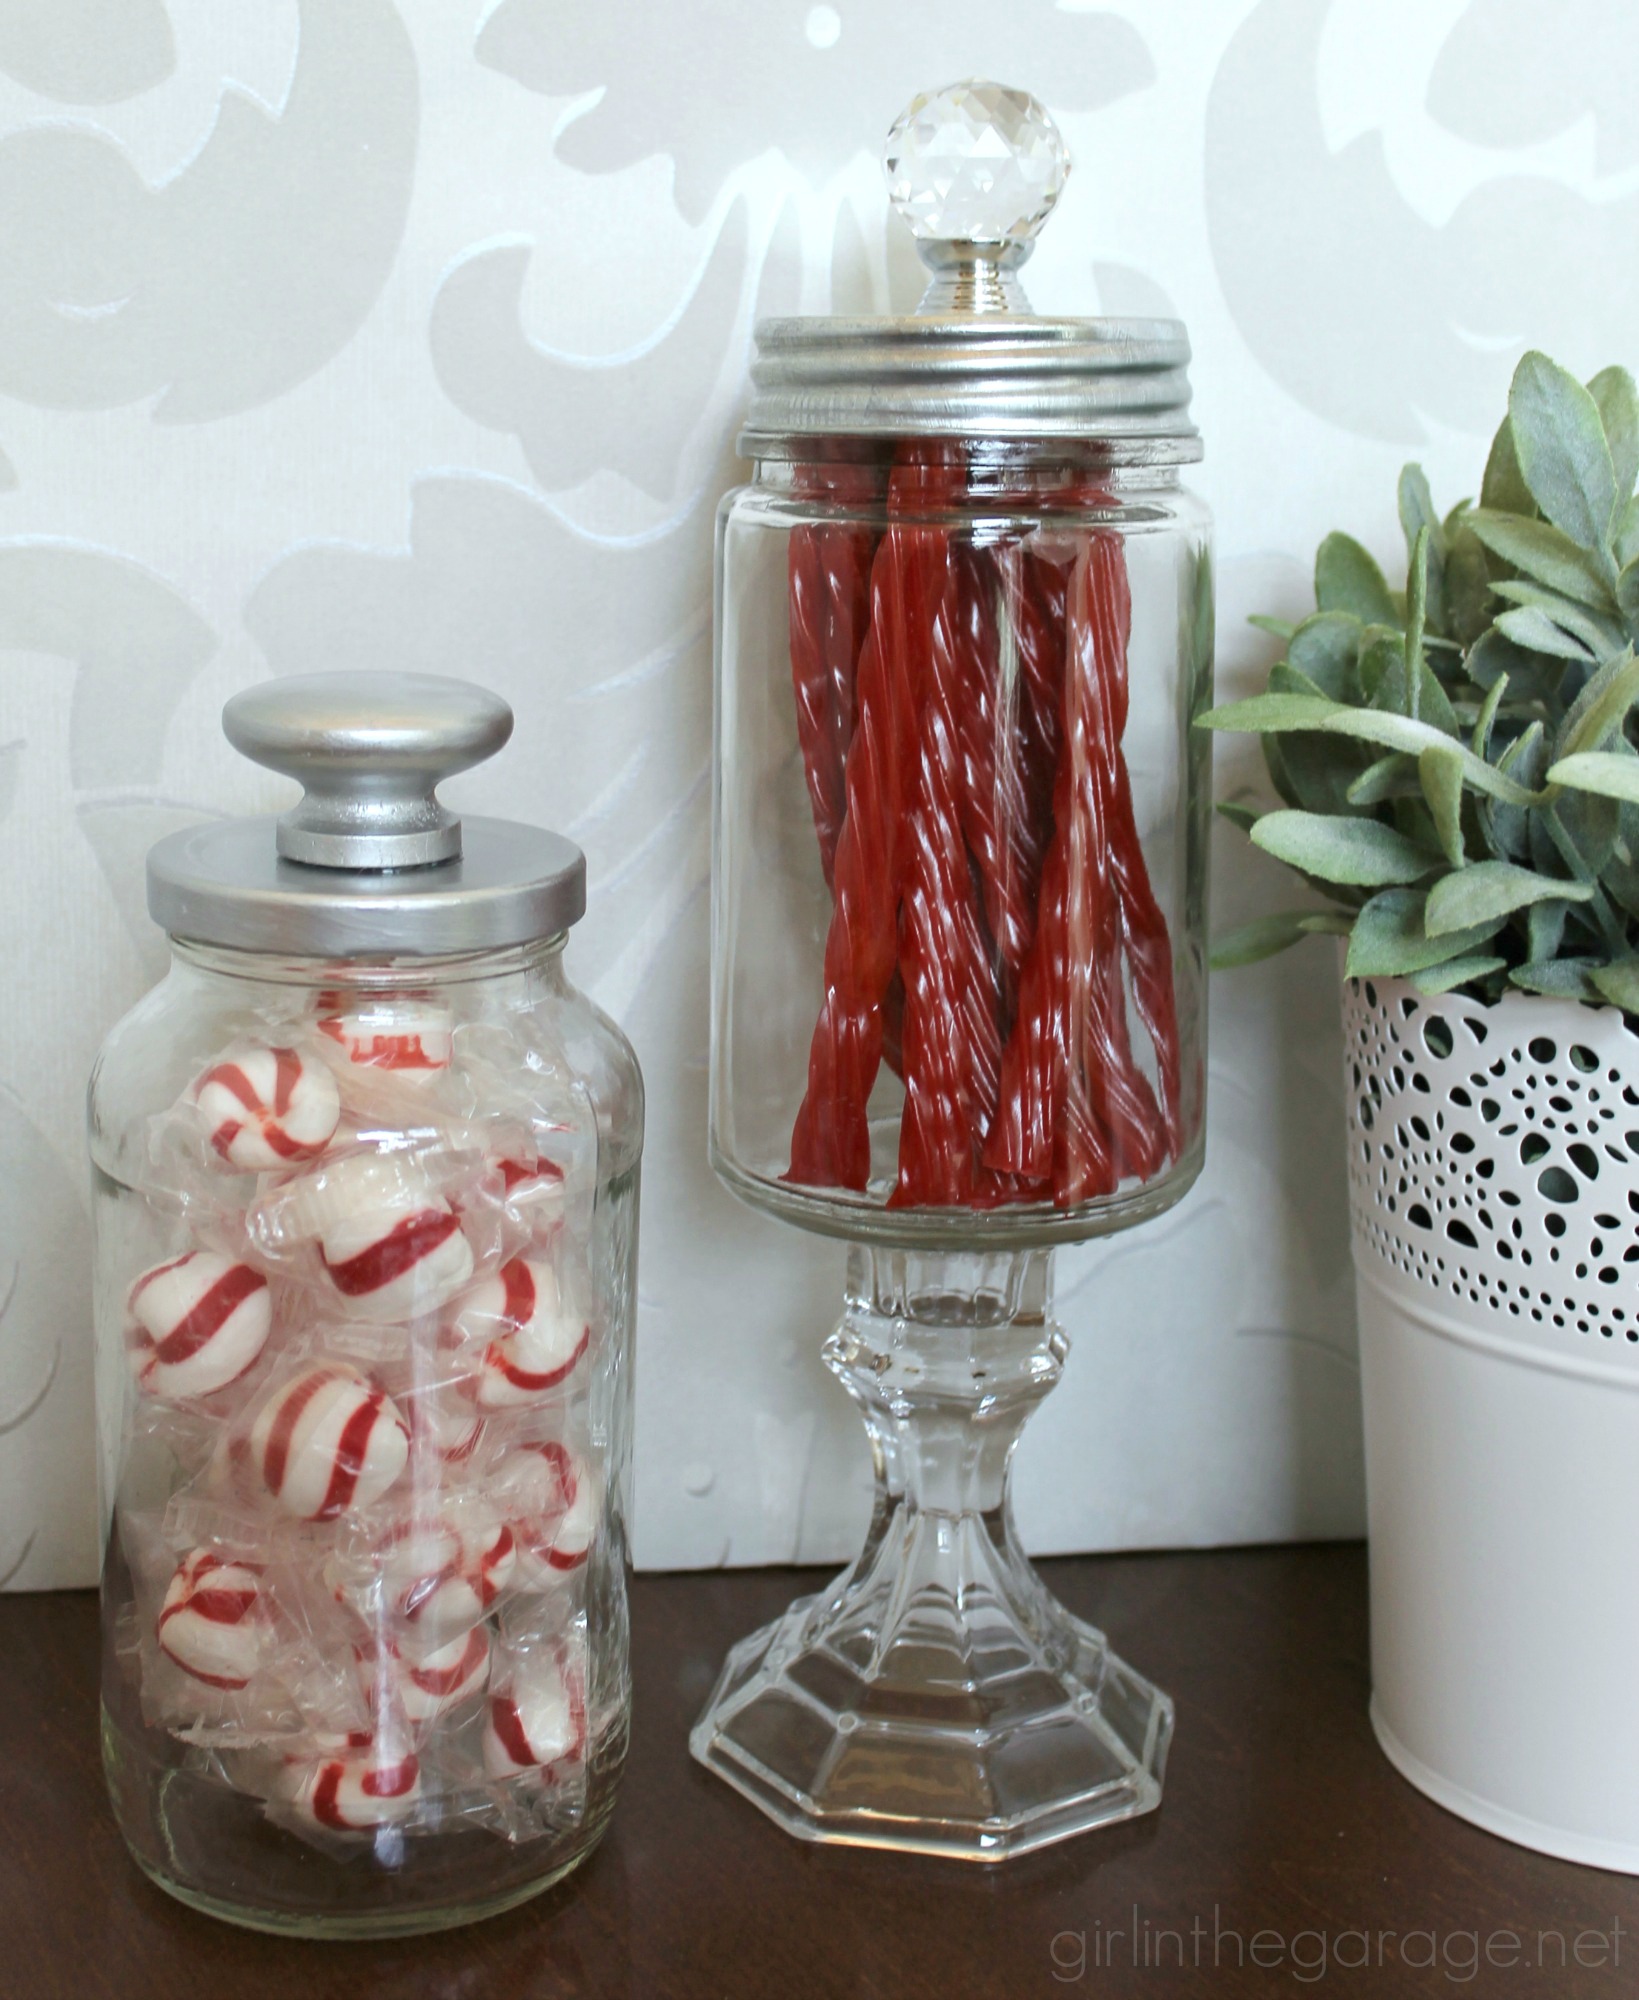 DIY Upcycled Glass Jars - so easy and cute! By Girl in the Garage